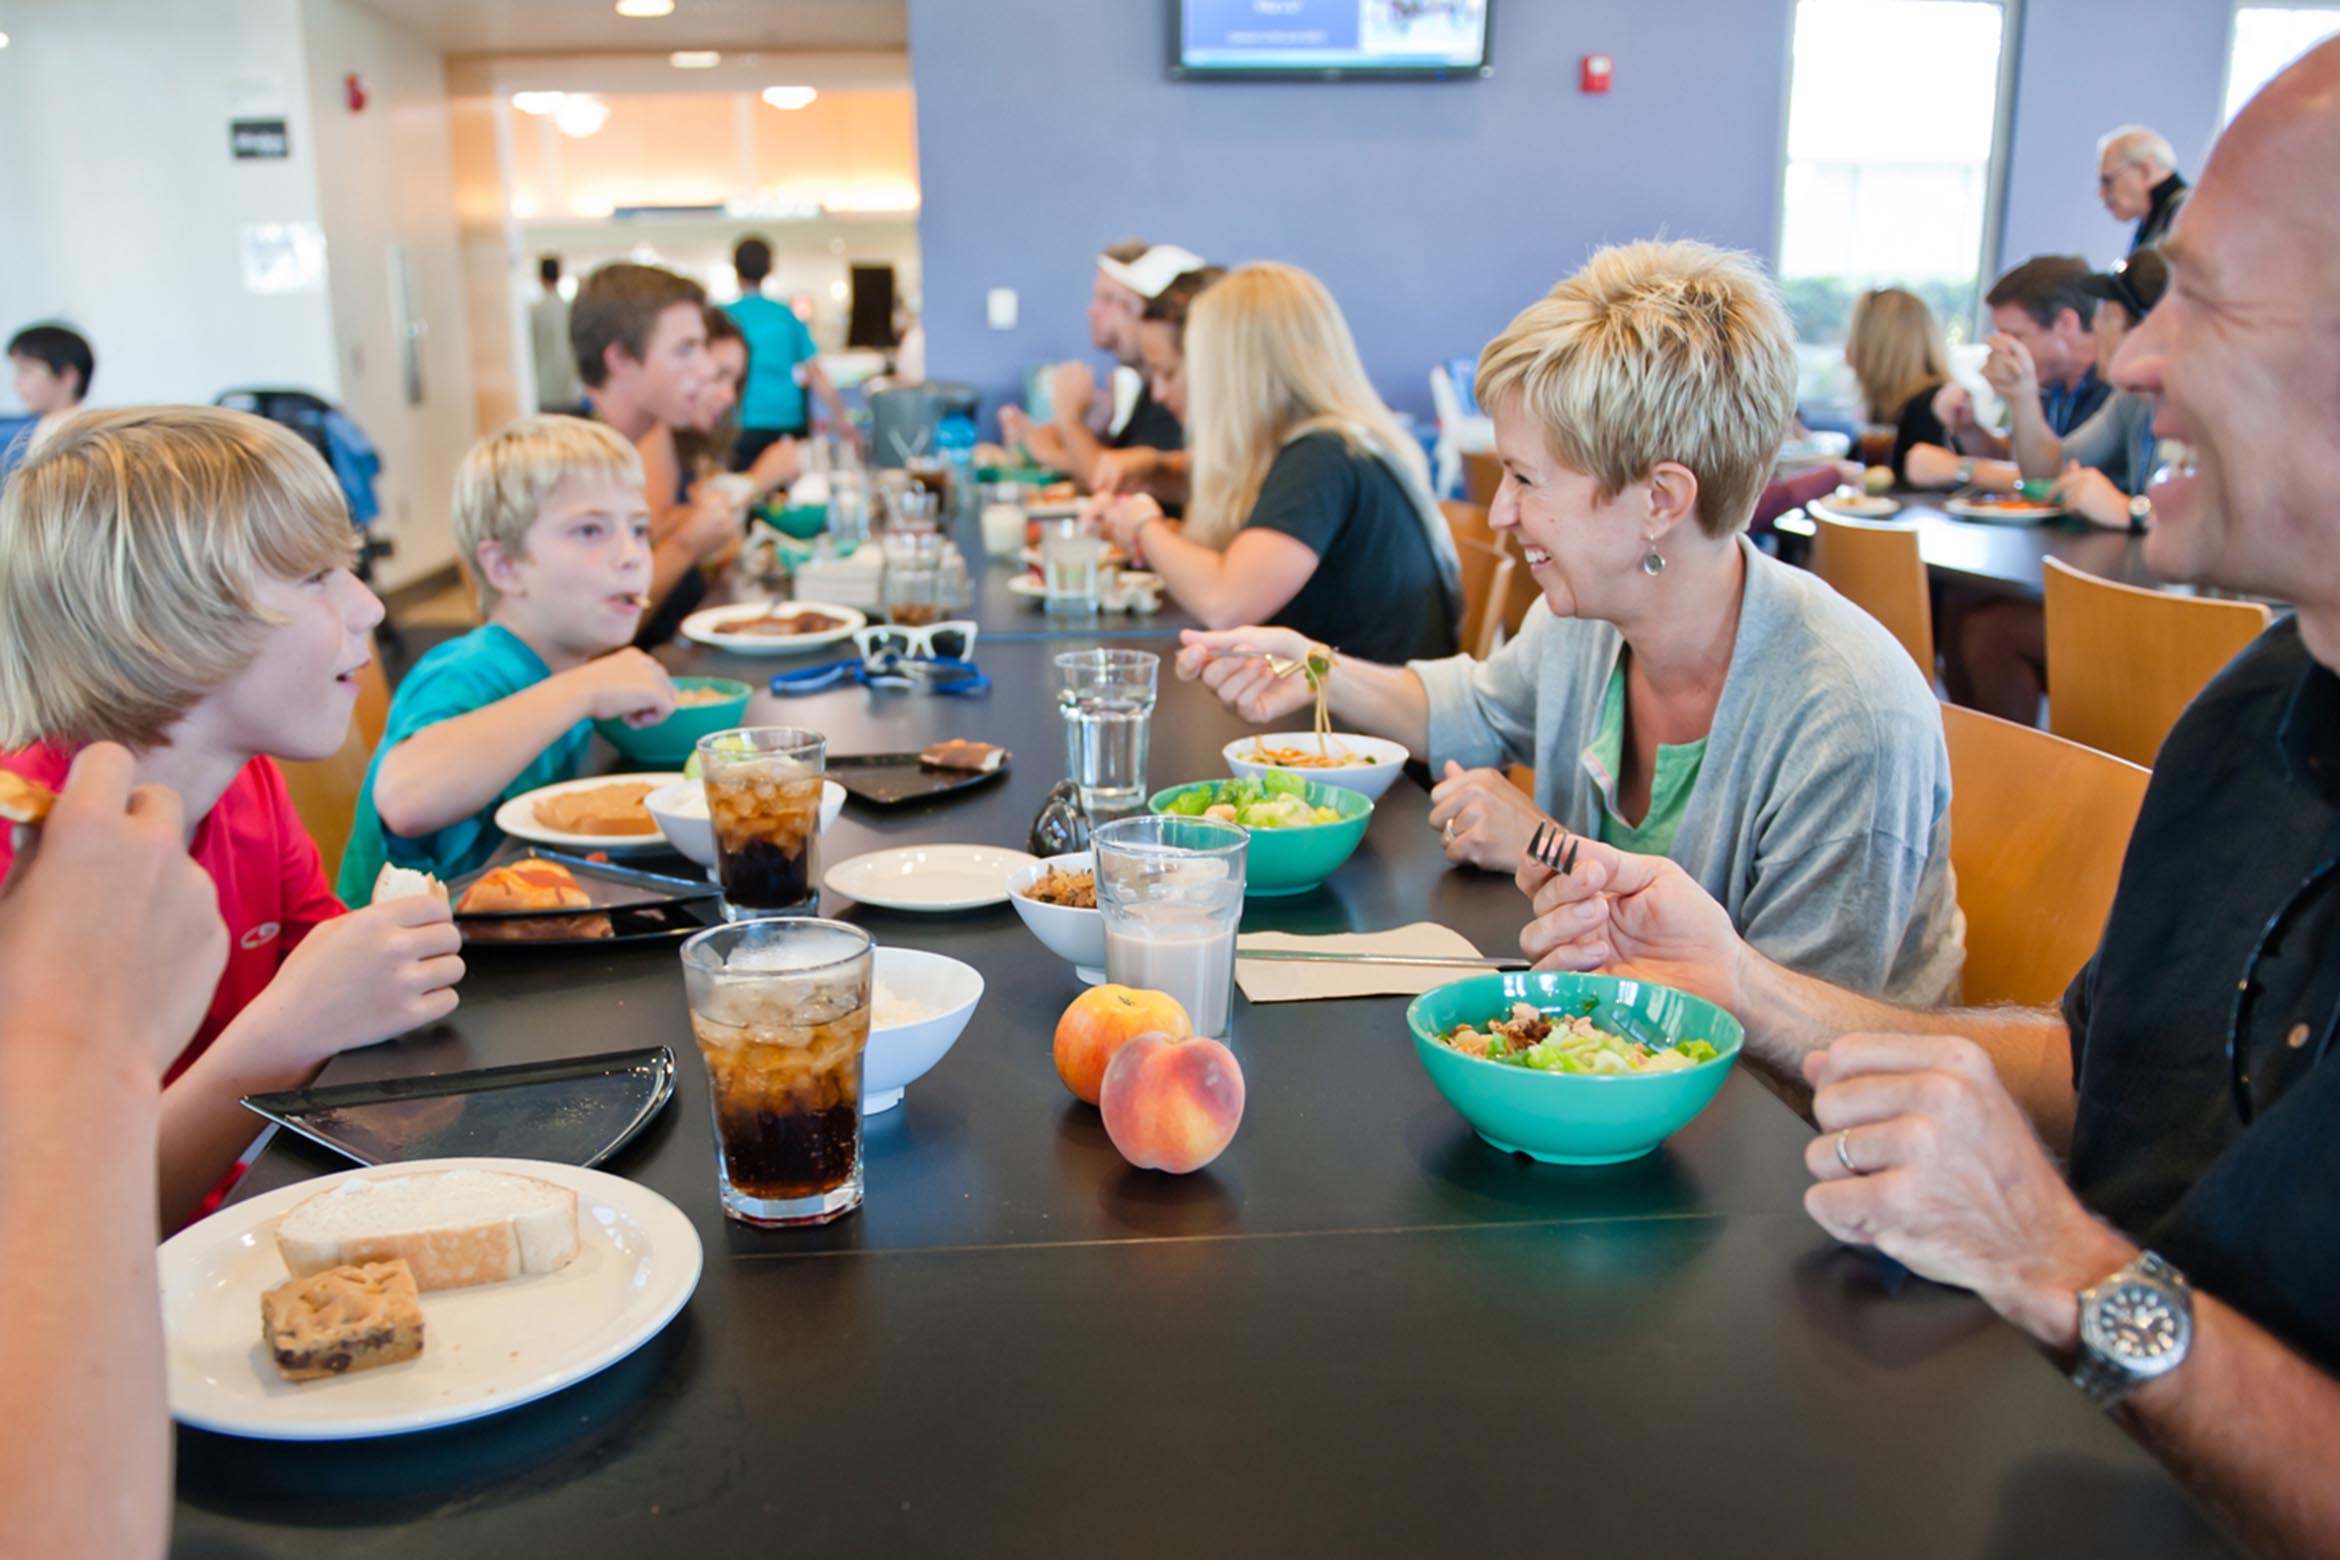 Family eating a meal together in the dining commons.